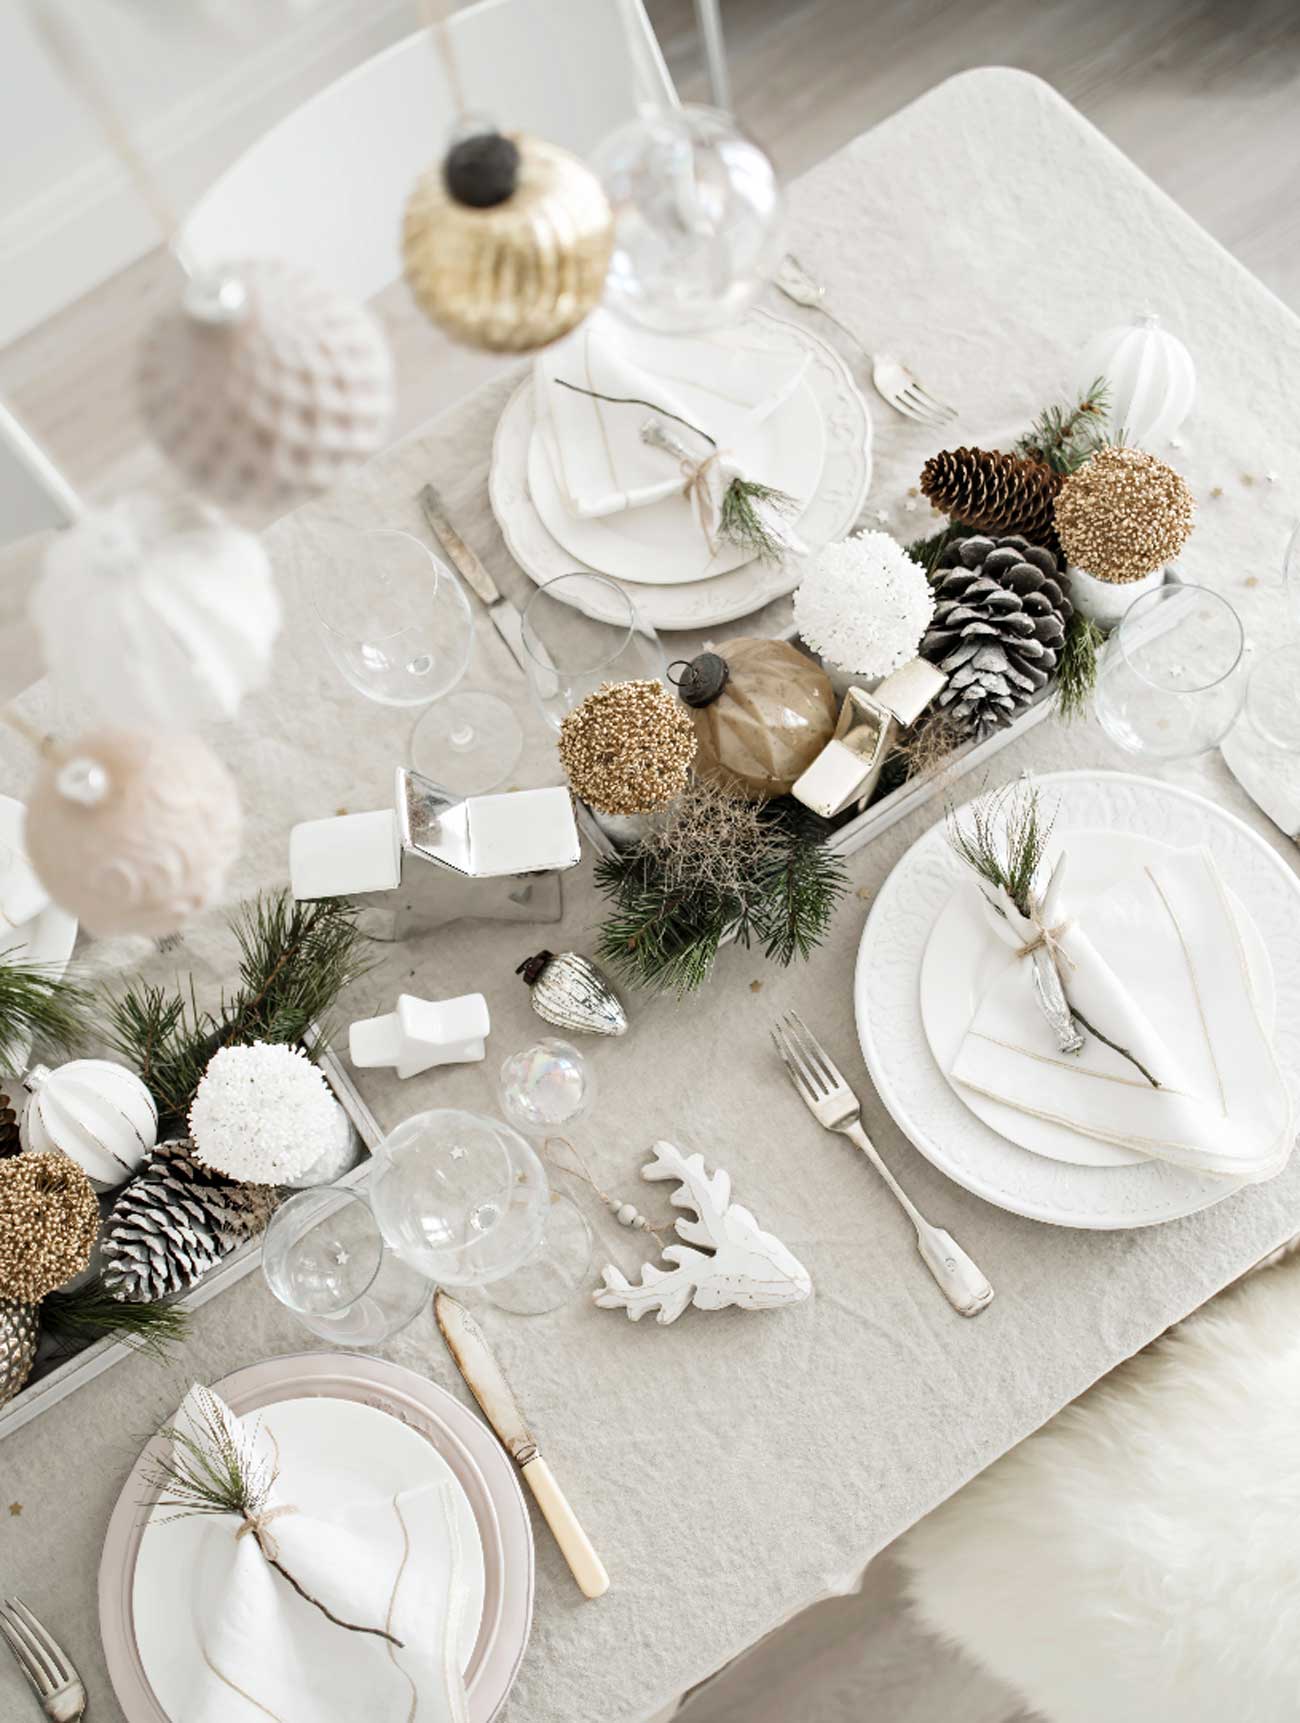 Winter bridal shower theme tablescape in white, silver and green with rustic elements